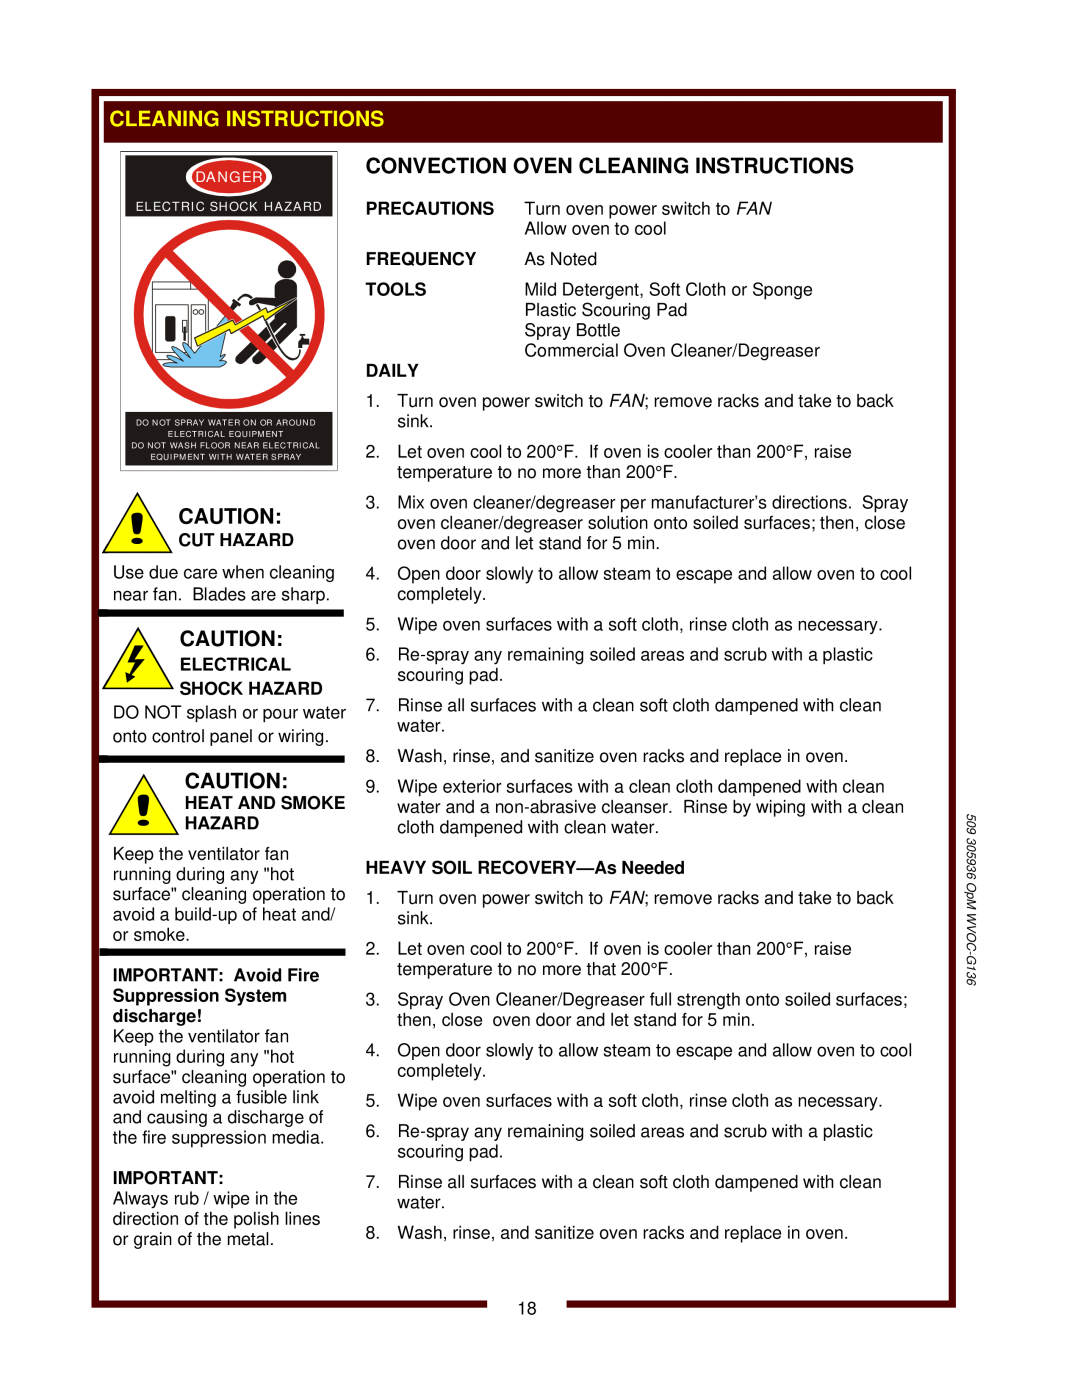 Wells WVOC-G136 Convection Oven Cleaning Instructions, Cut Hazard, Heat And Smoke Hazard, Precautions, Frequency 